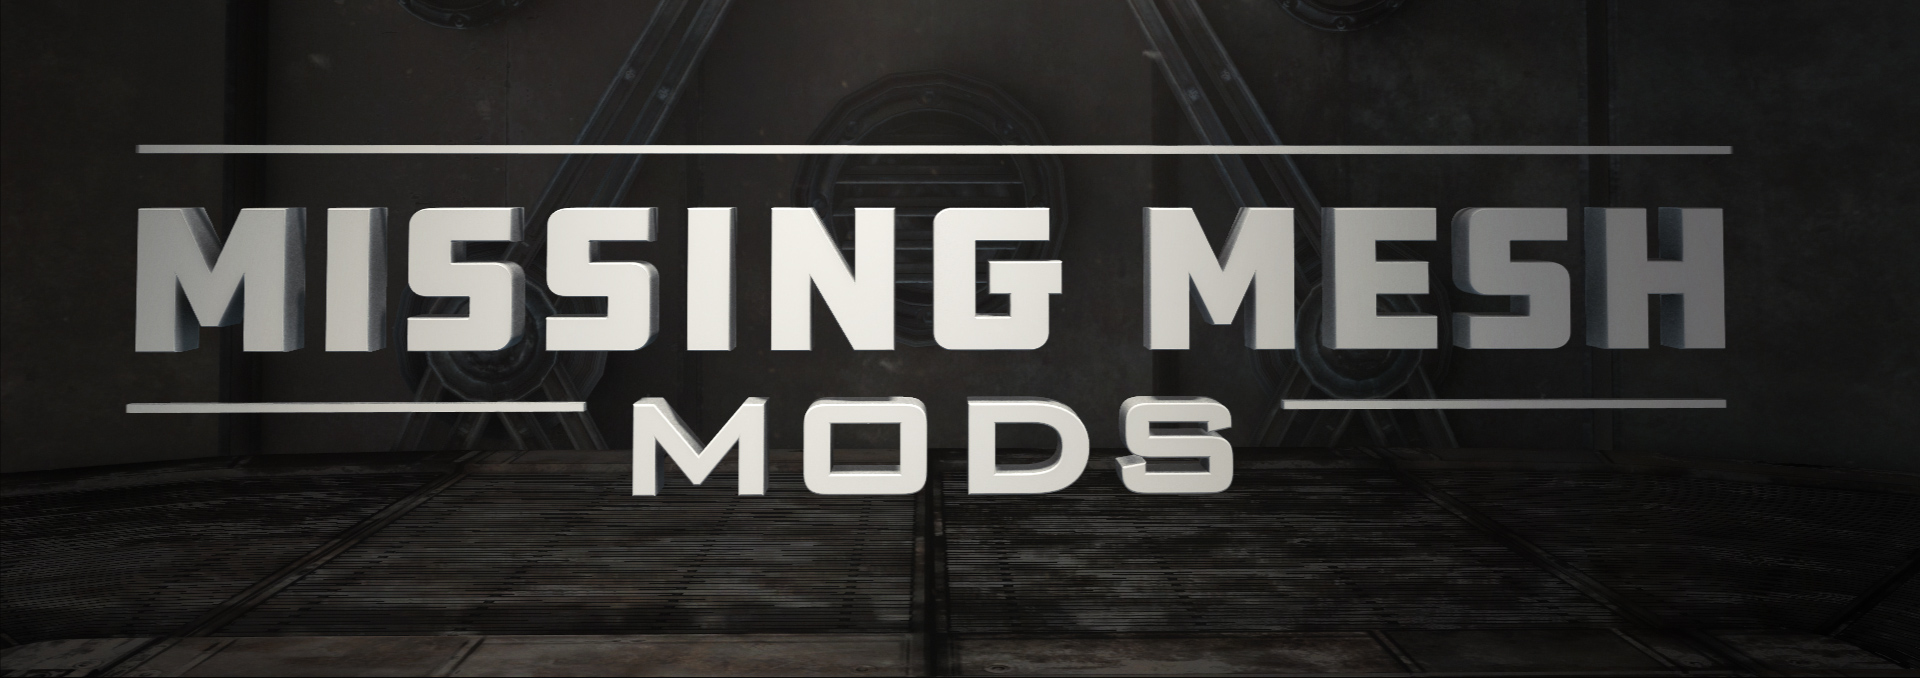 Missing Mesh Mods - Fallout 3